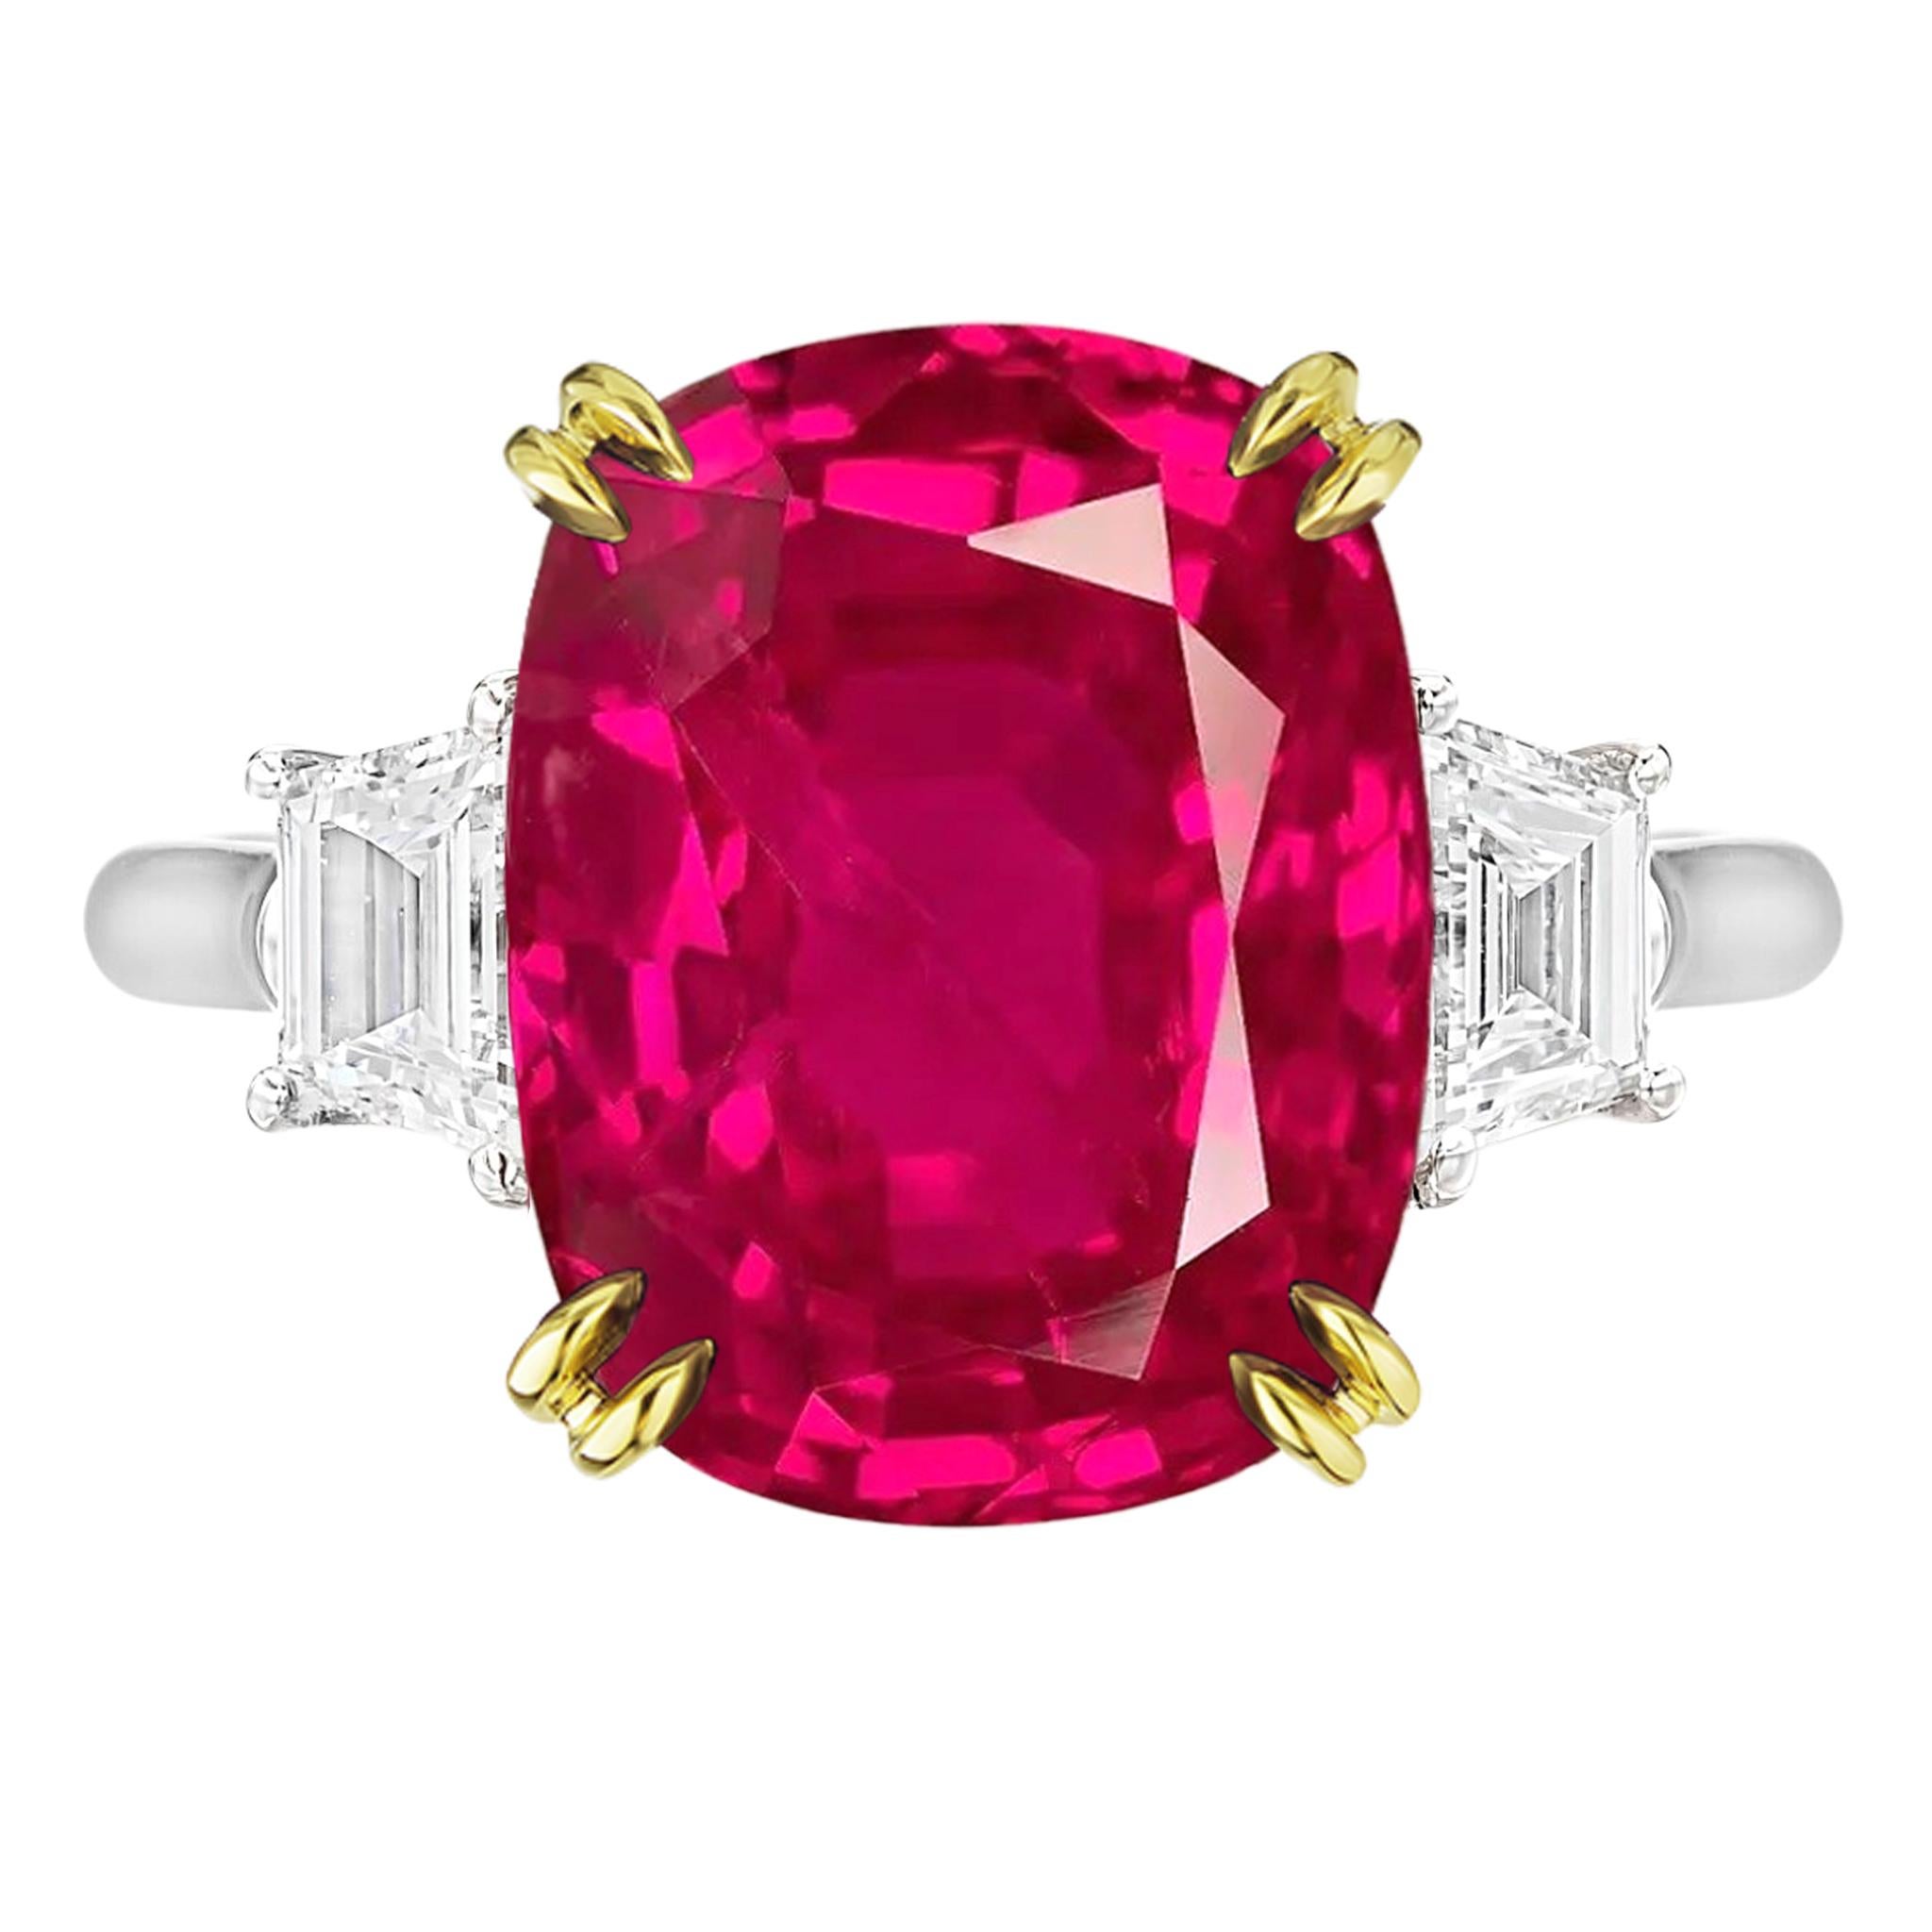 Contemporary GRS No Heat Certified 5.05 Carat Ruby Cushion Diamond Ring For Sale